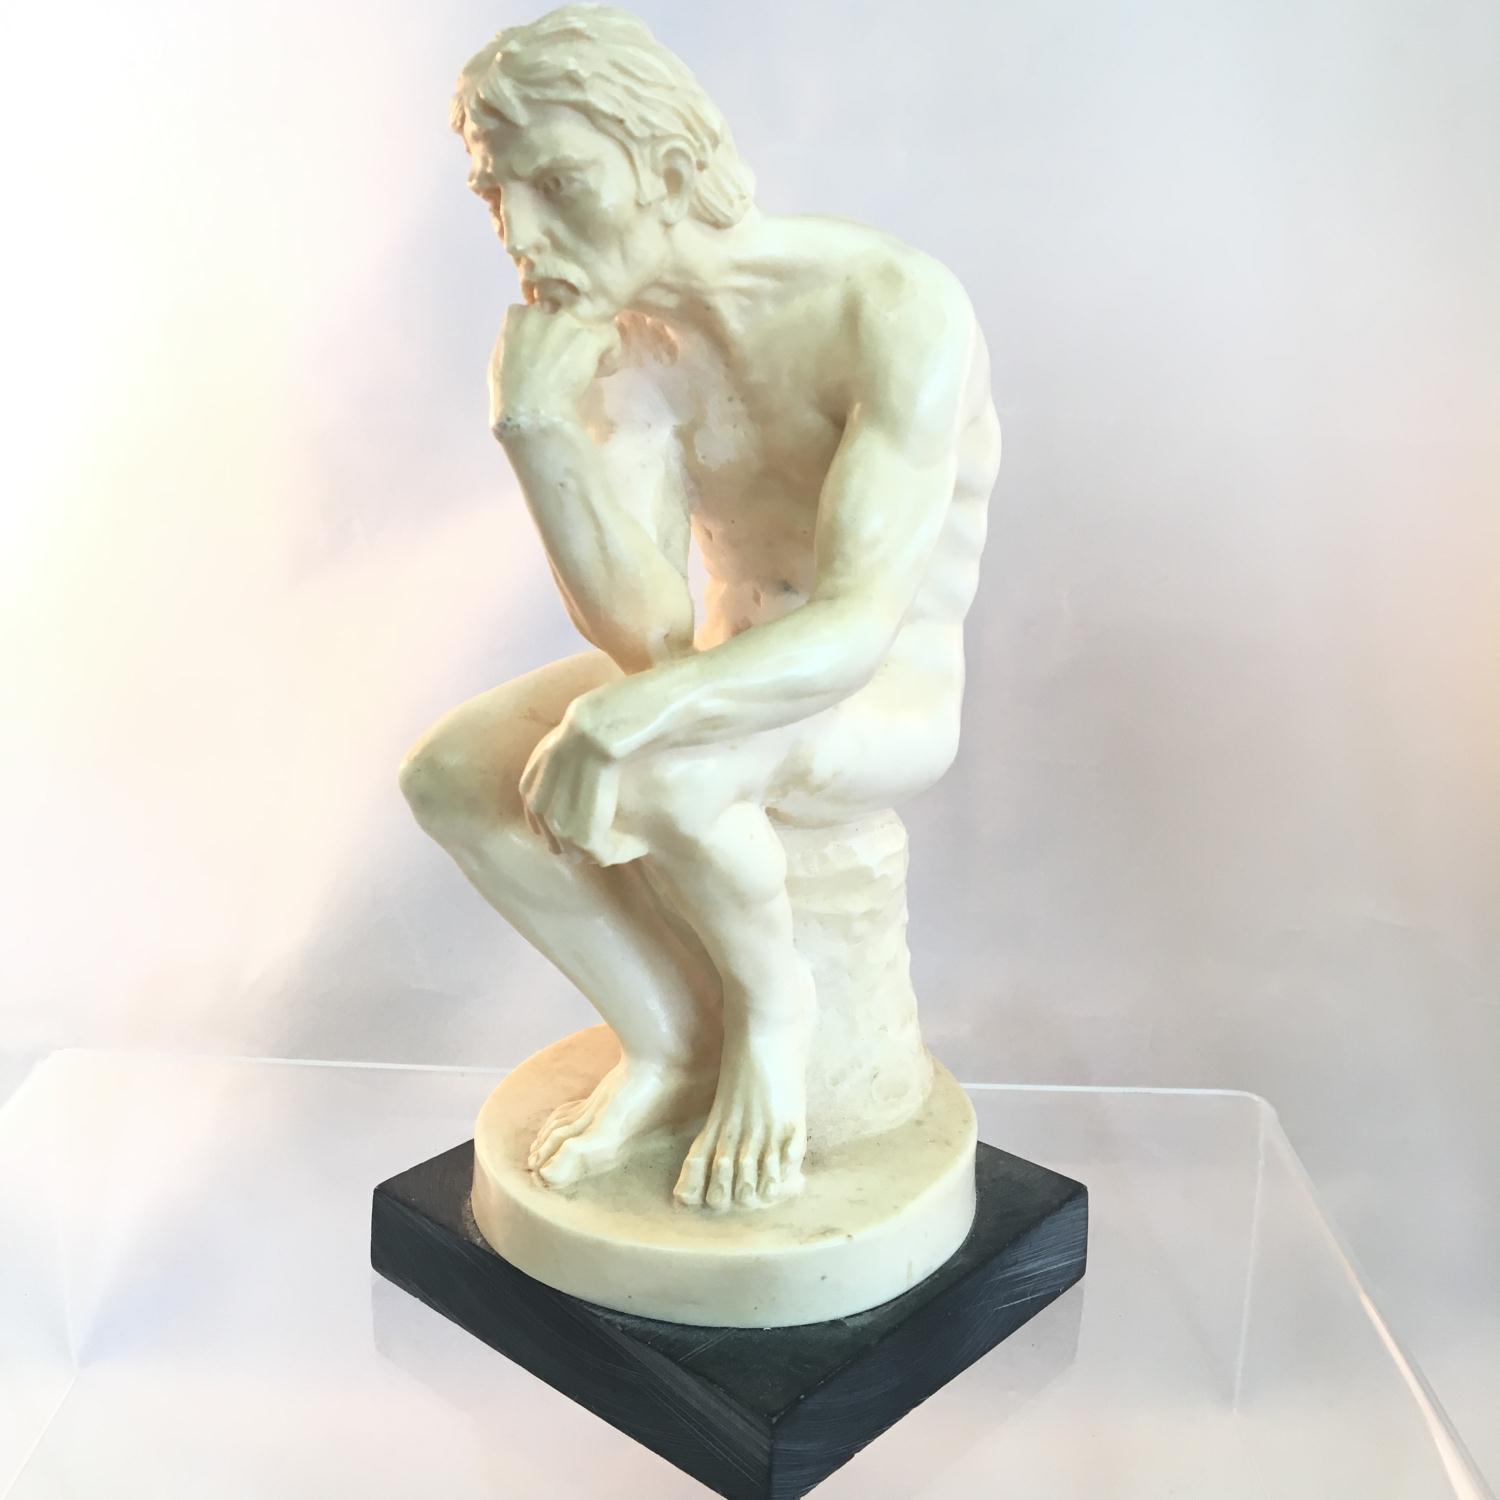 19cm sculpture of "The Thinking Man". Signed Santini